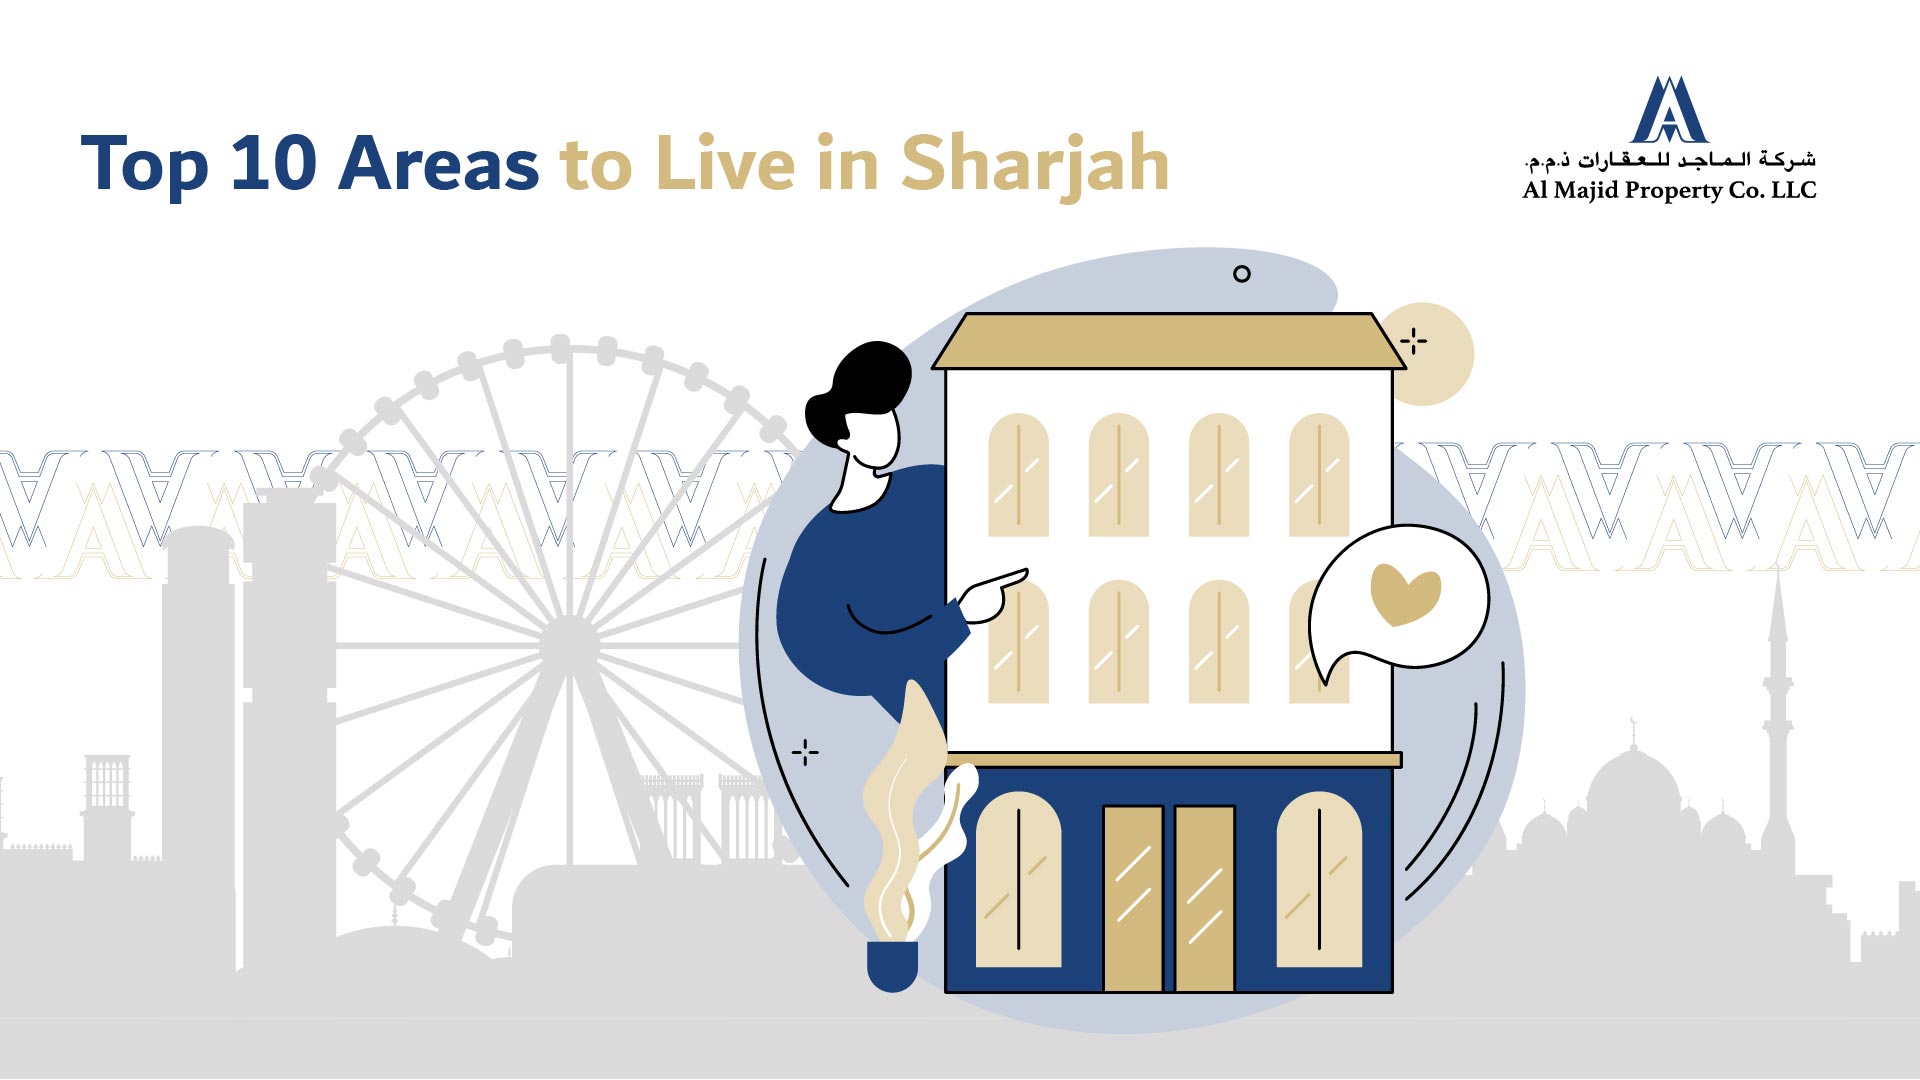 Top 10 Areas to Live in Sharjah